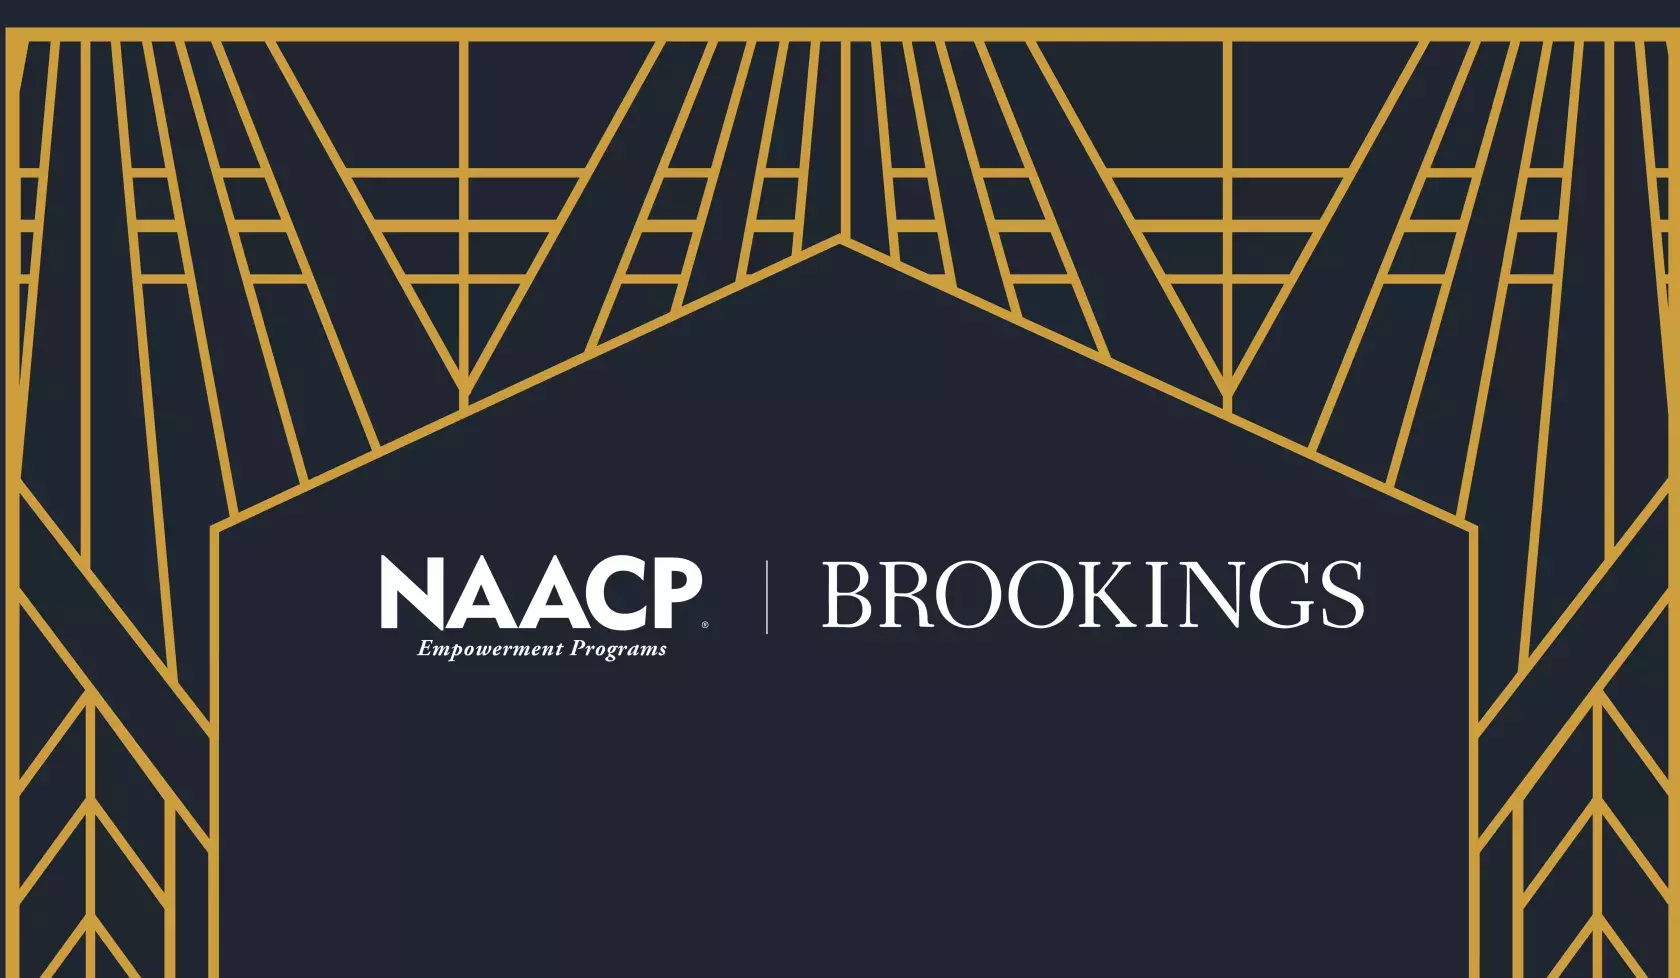 NAACP empowerment programs and Brookings logo